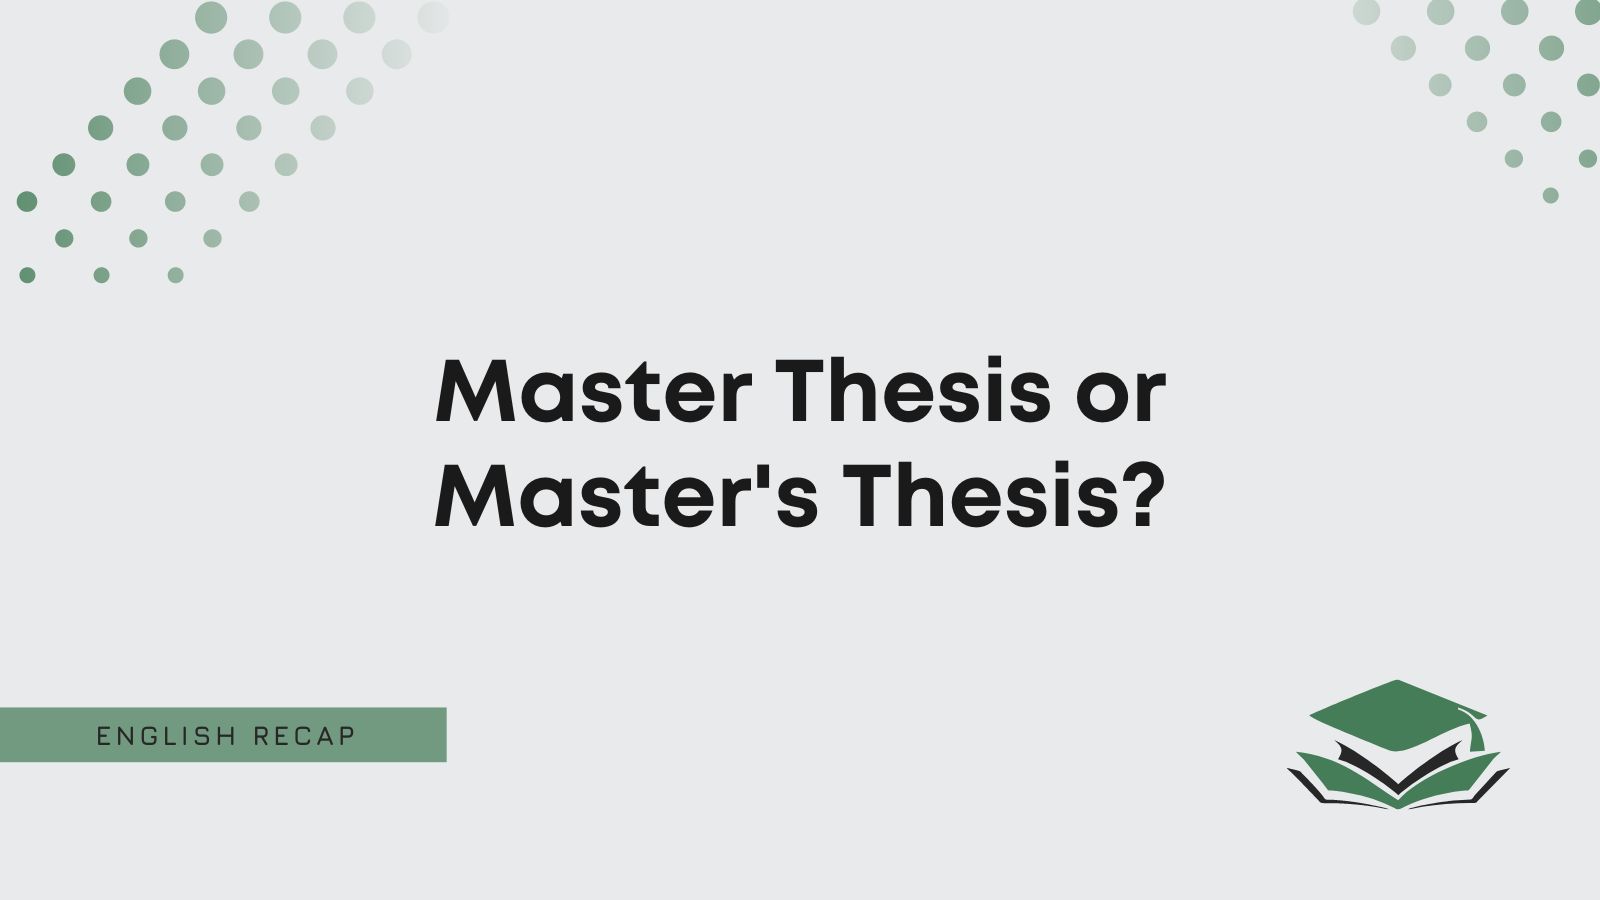 plural for master's thesis